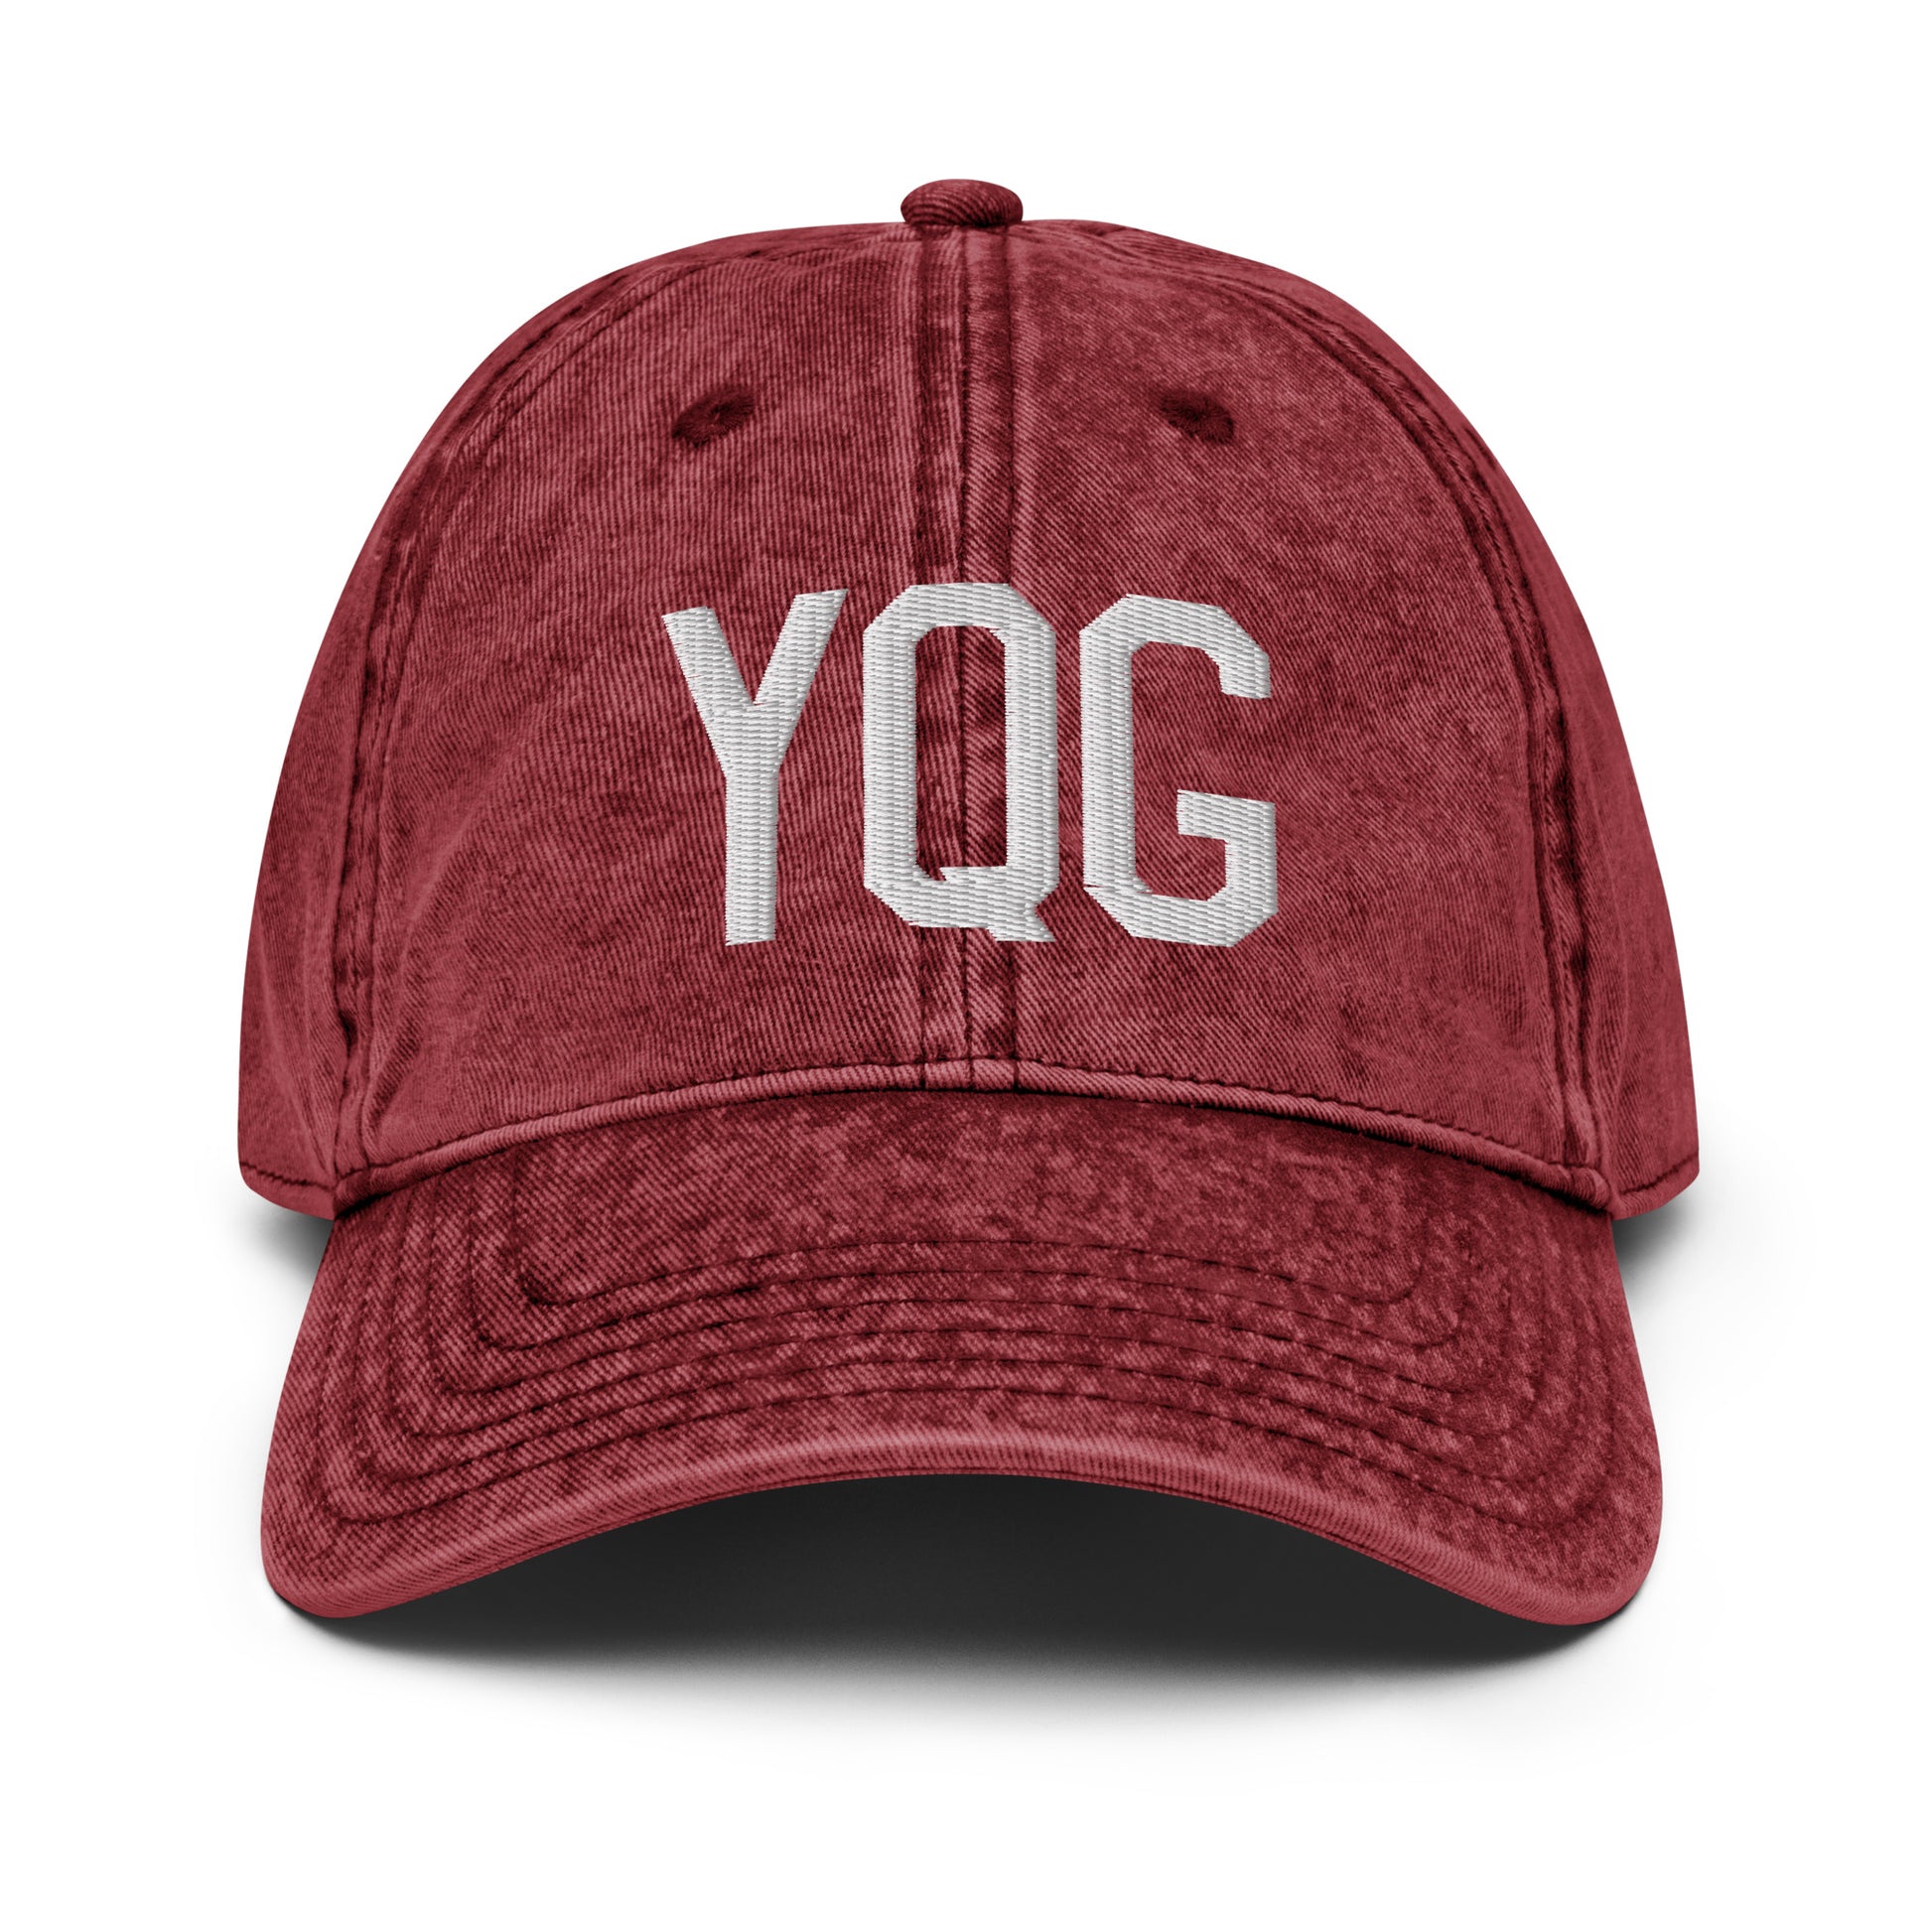 Airport Code Twill Cap - White • YQG Windsor • YHM Designs - Image 19